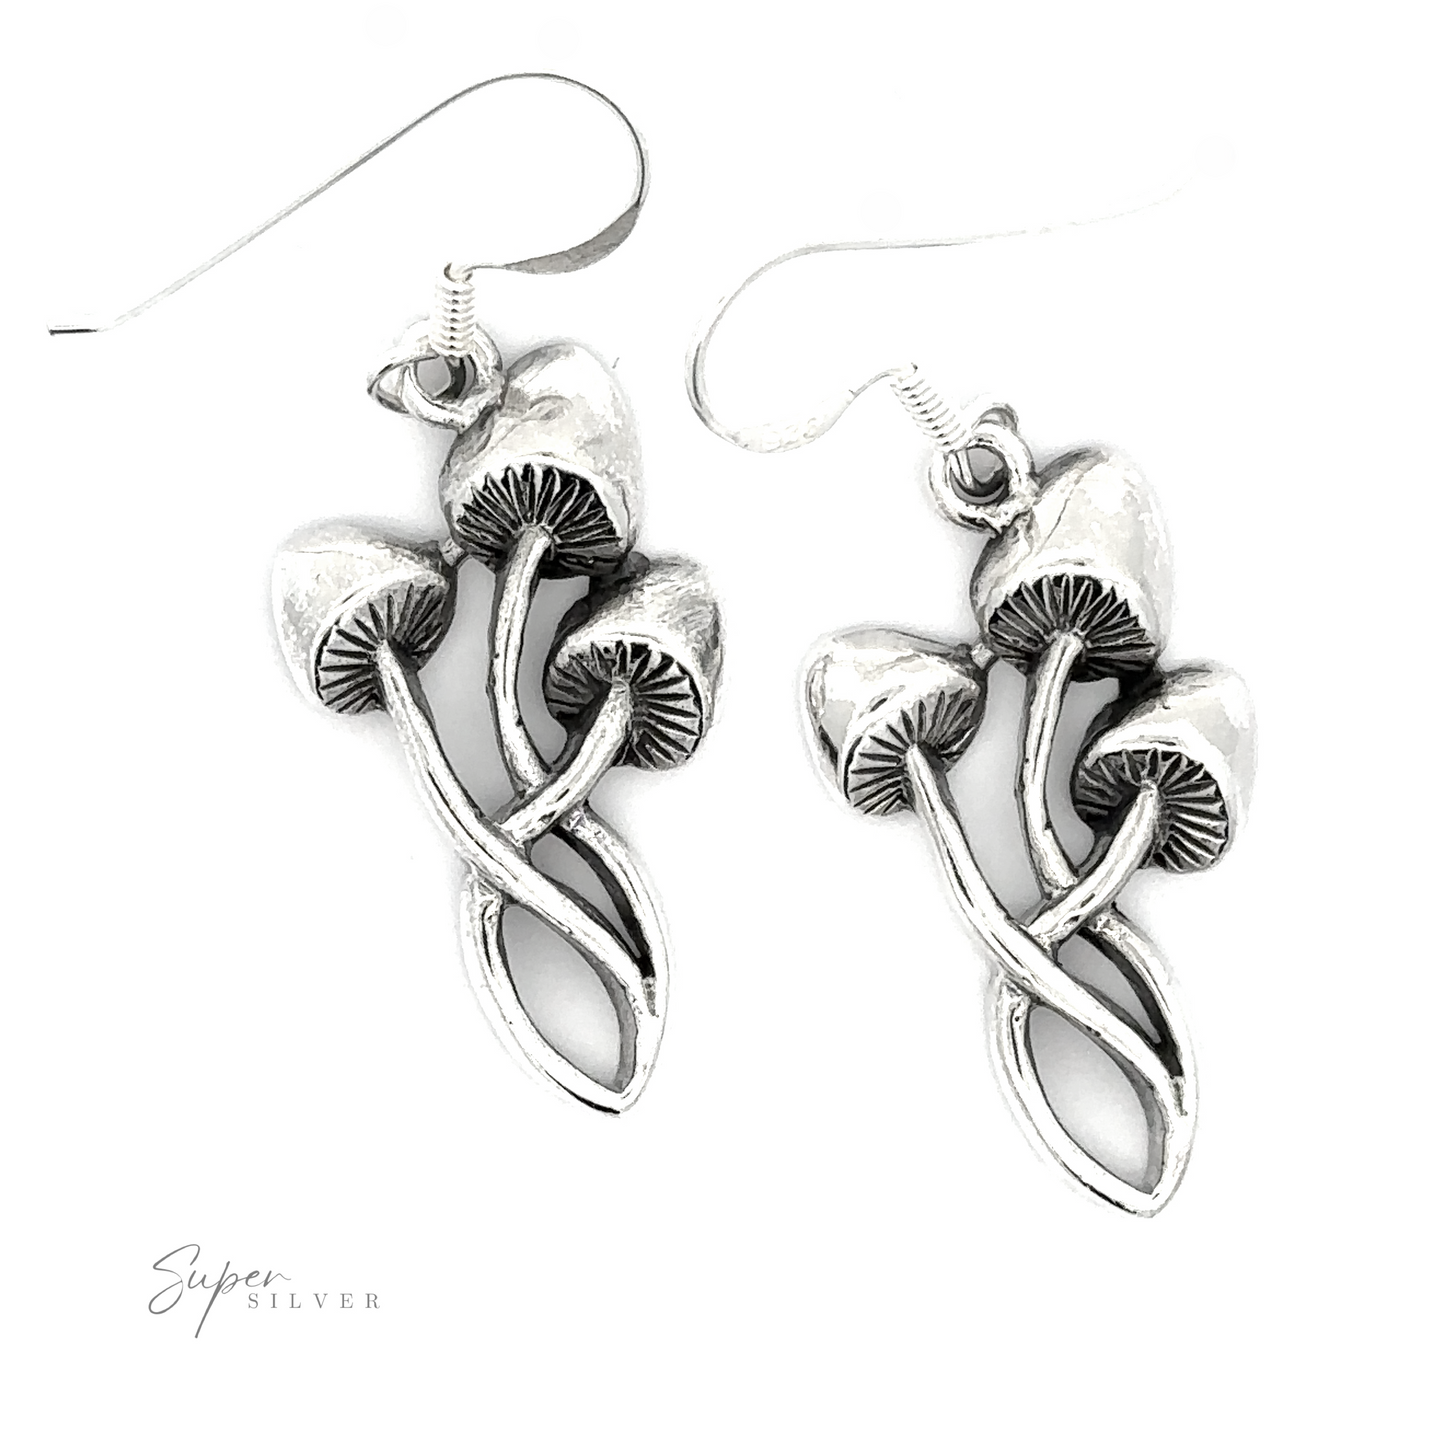 A pair of Mushroom Earrings, displayed against a white background with a signature reading "super silver," exude a nature-inspired charm.